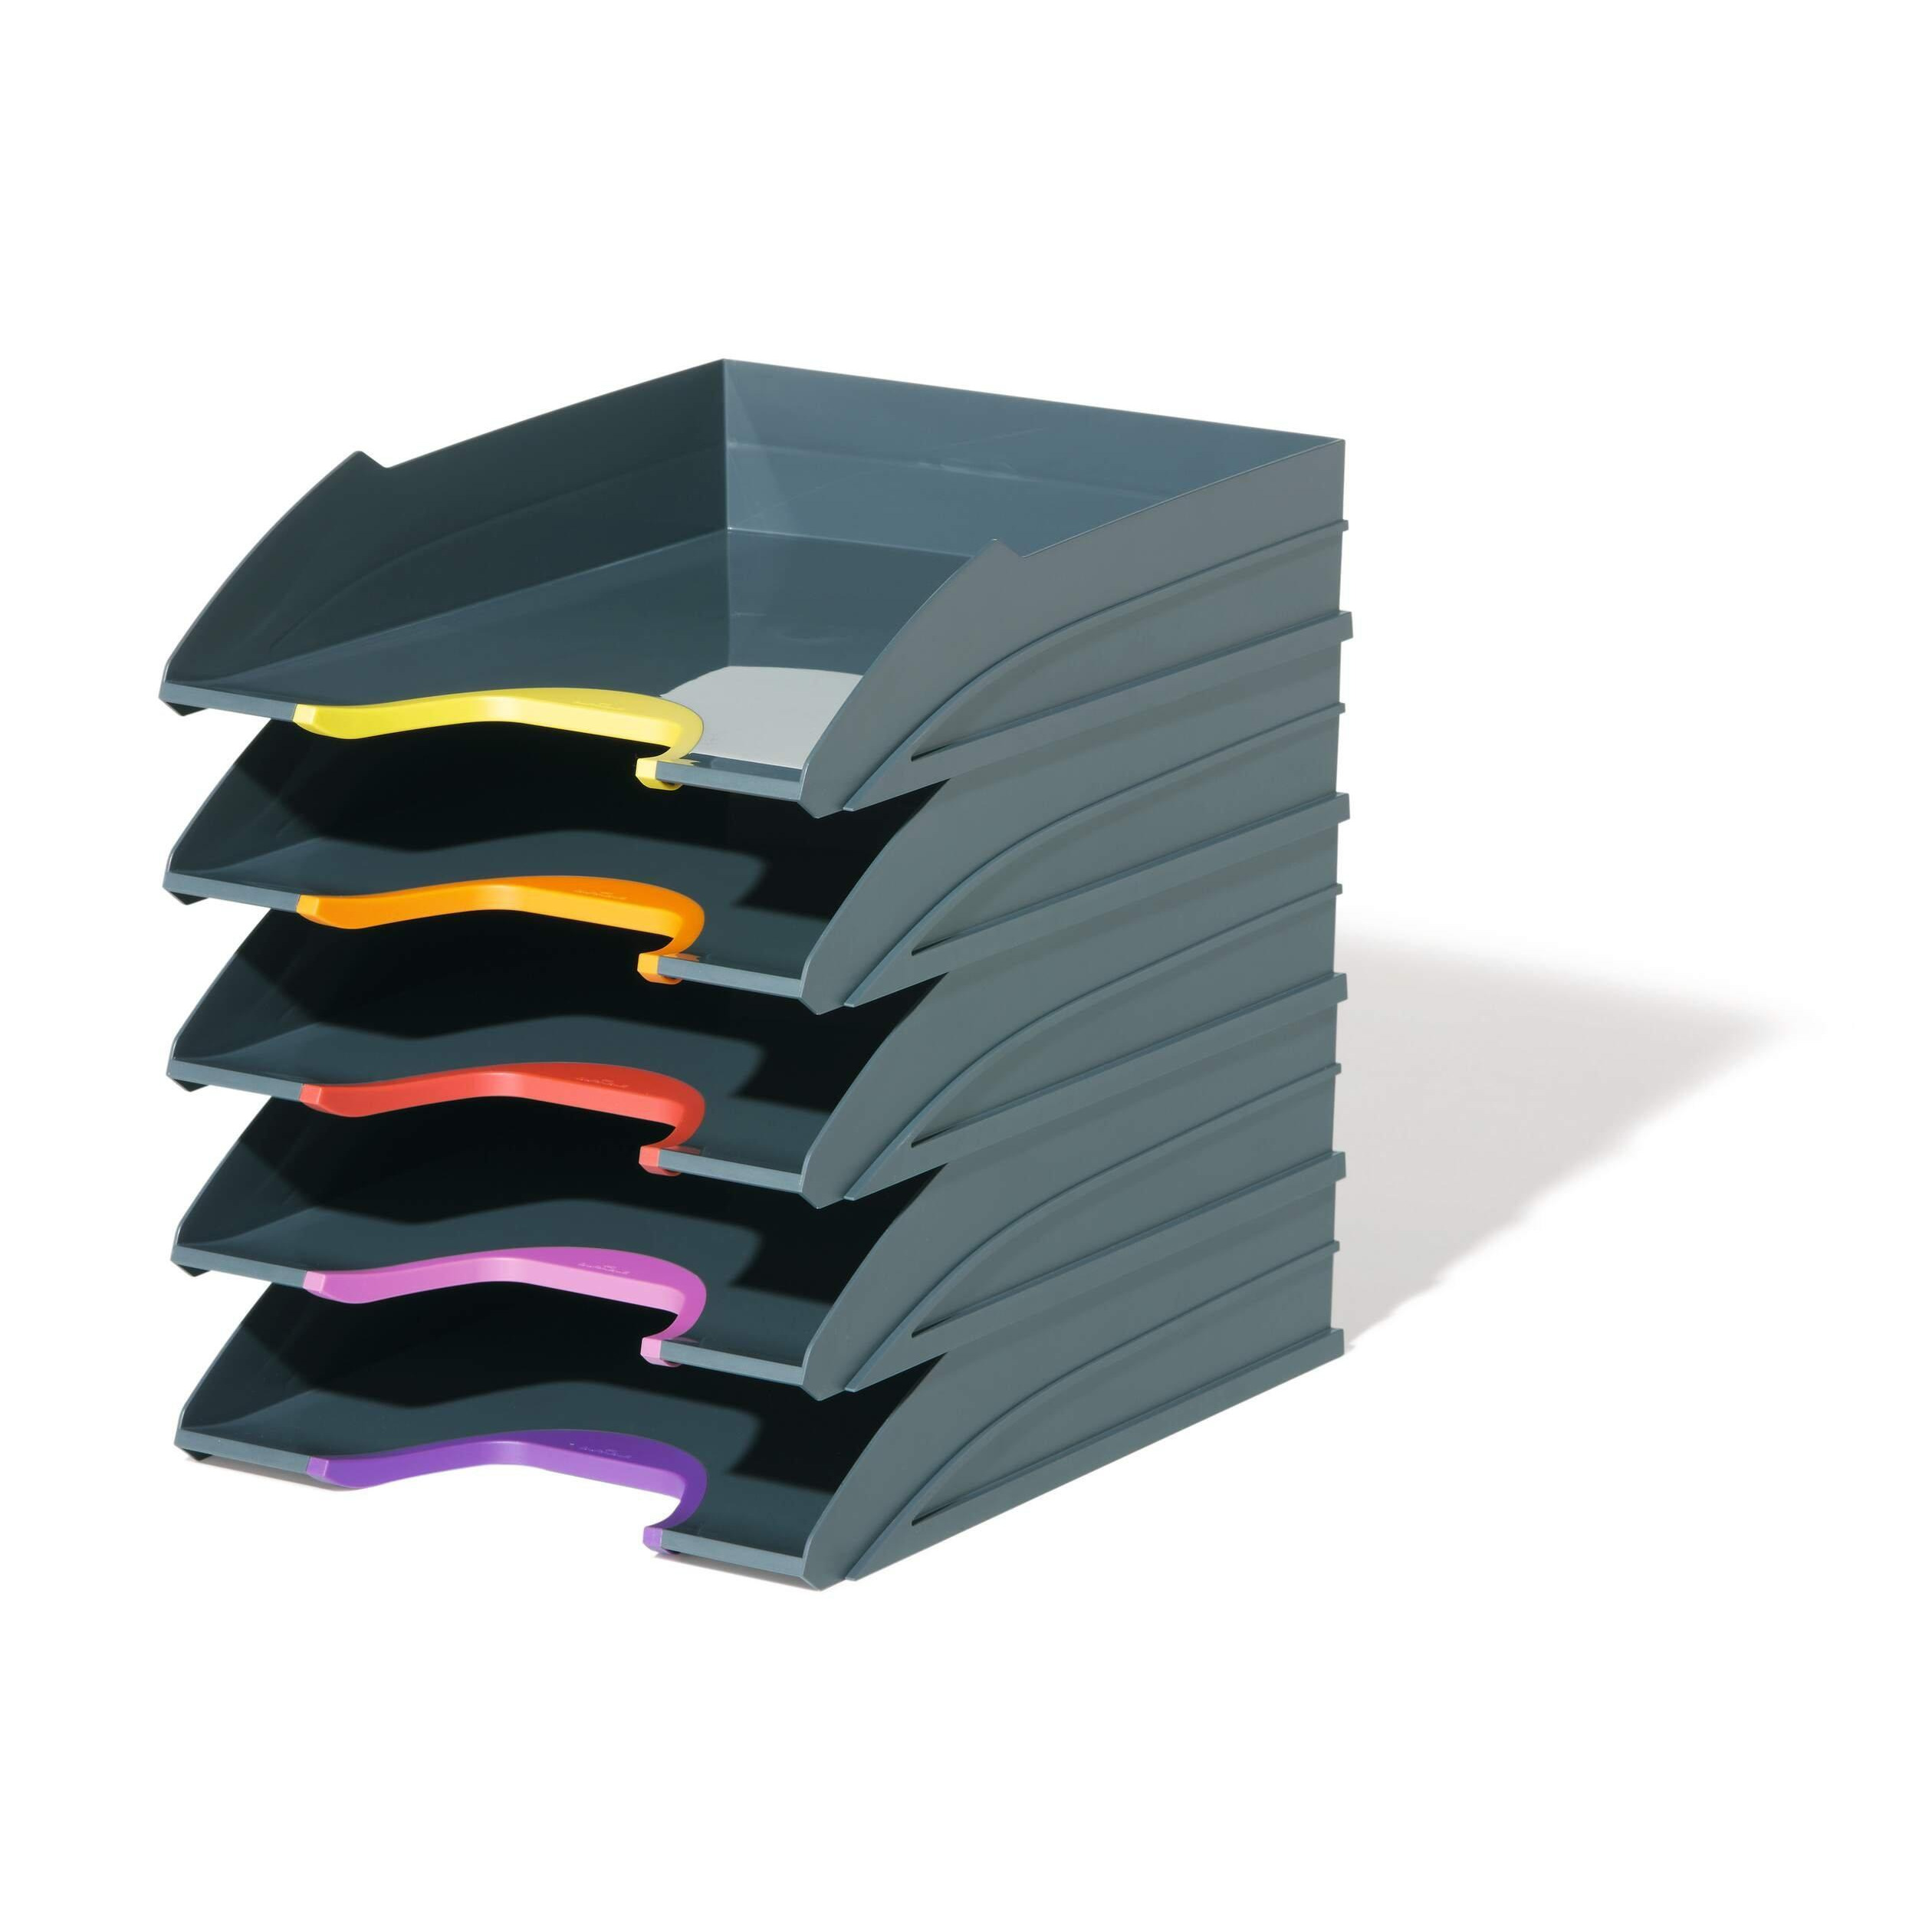 VARICOLOR Stackable Document Filing Letter Tray - 5 Pack - A4 Grey - image 1